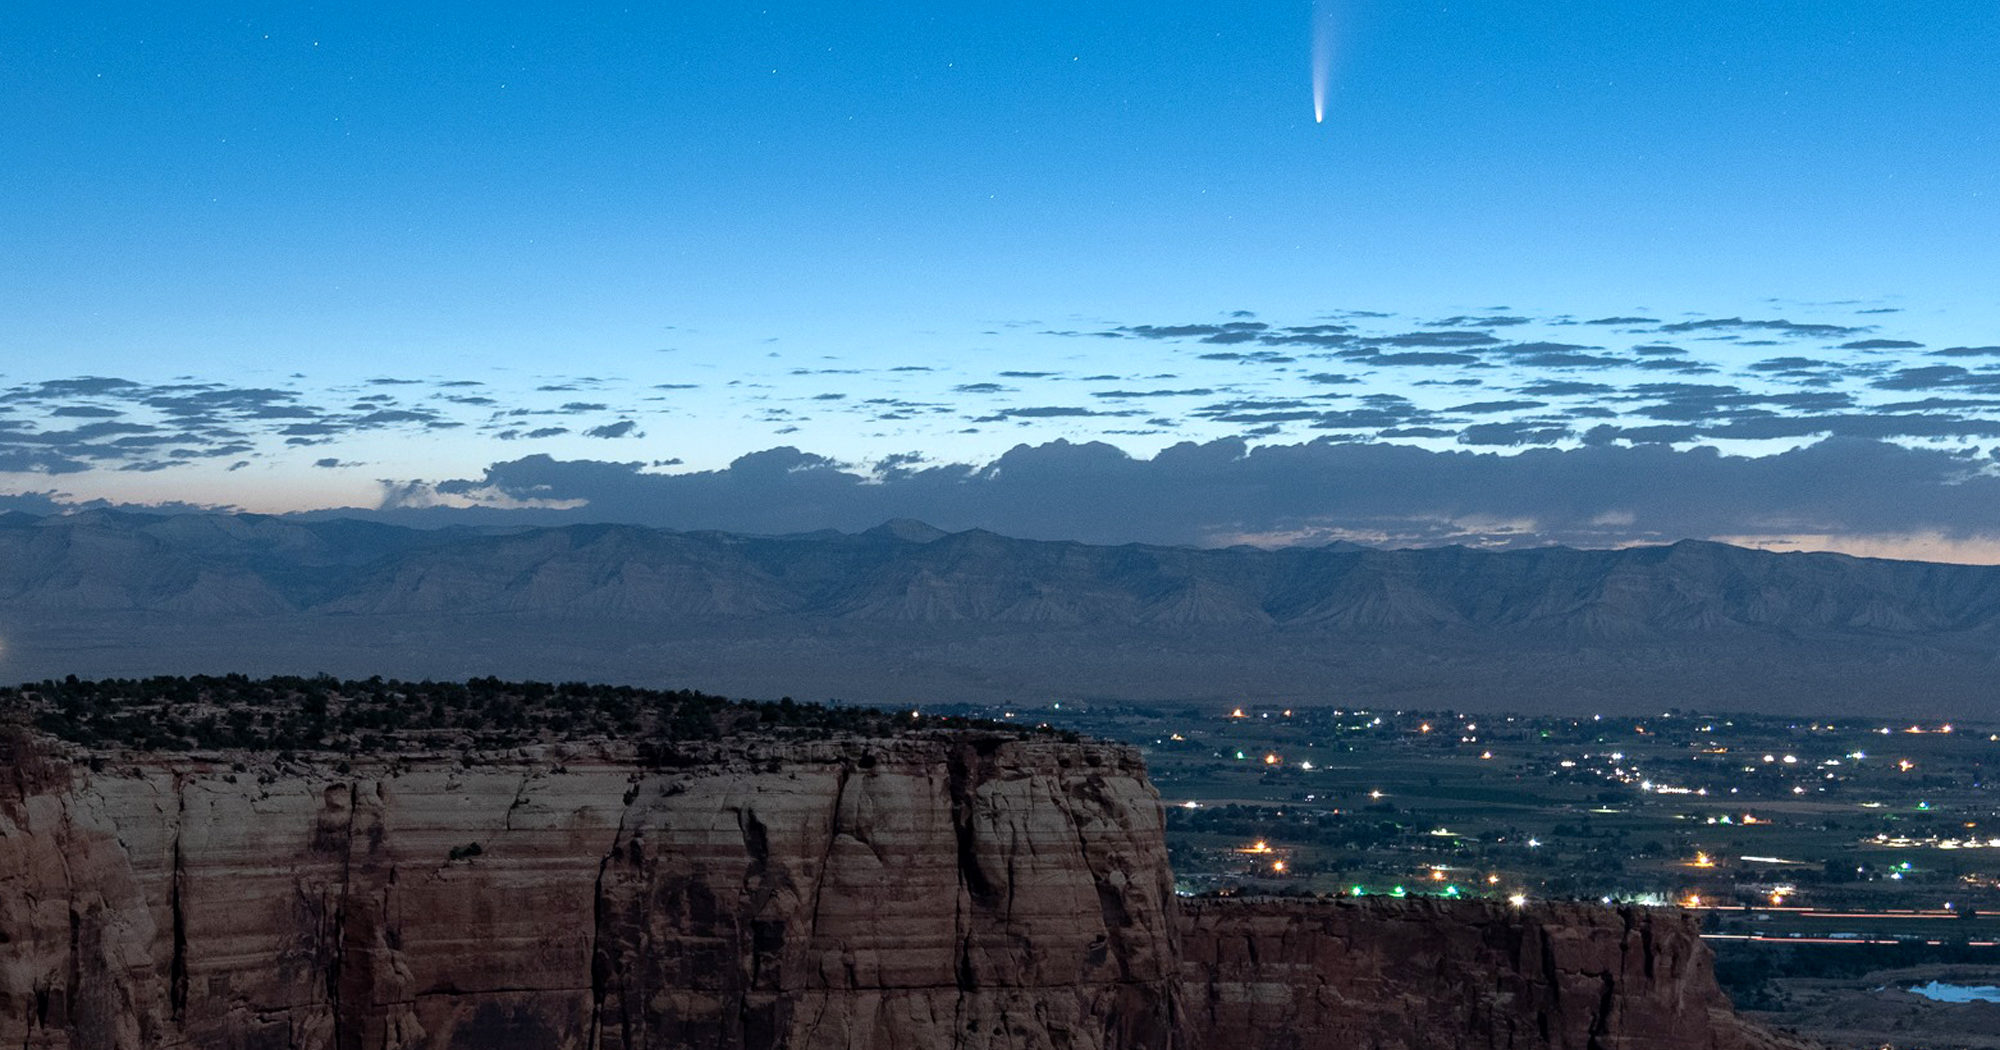 Comet Neowise soars in the horizon of the early morning sky in this view from the Colorado National Monument west of Grand Junction, Colorado, on July 9, 2020.